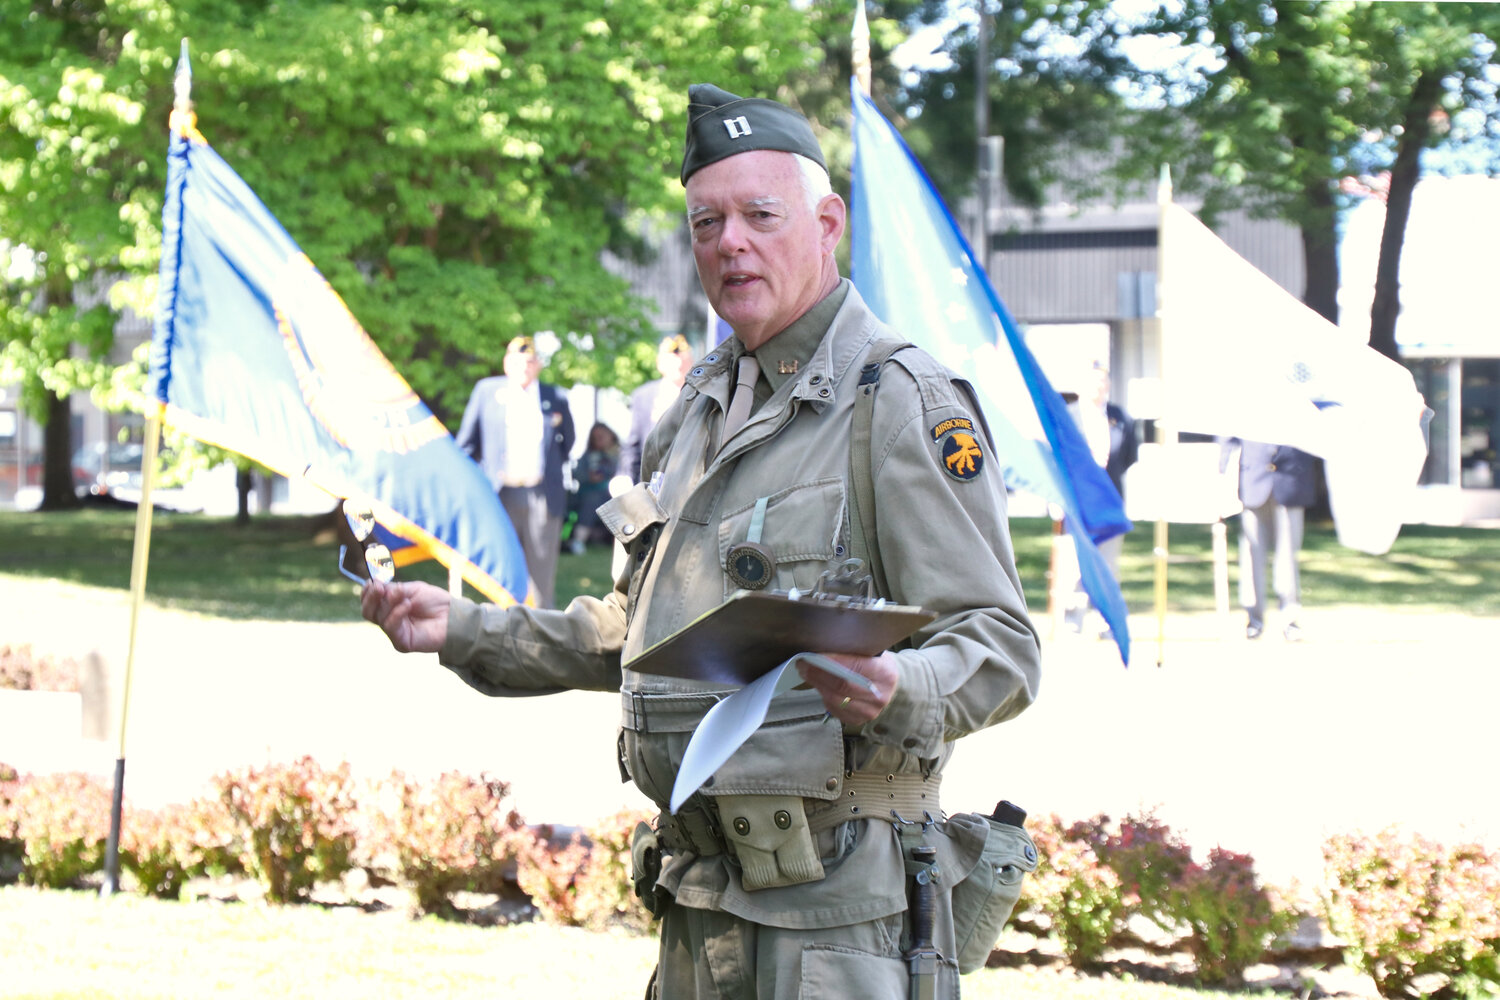 Lewis County Historical Society President Peter Lahmann speaks to attendees of a Memorial Day ceremony at George Washington Park in Centralia Monday. Lahmann is also the owner of America’s Team Museum in downtown Centralia.